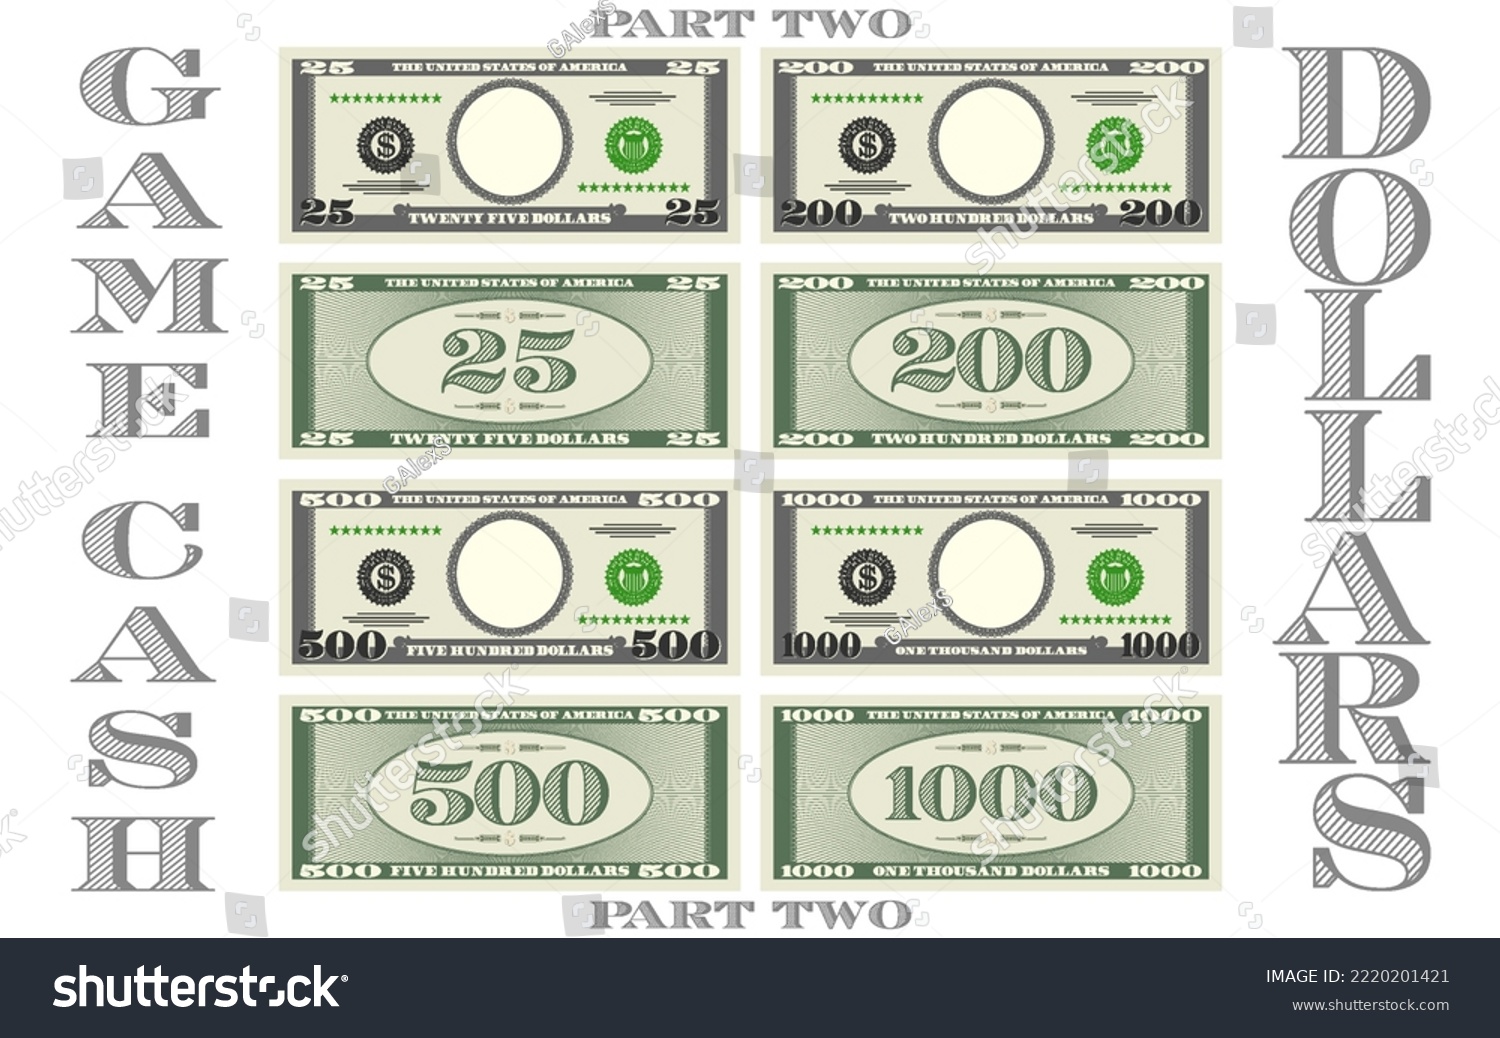 SVG of Fictional game paper money in the style of US dollars. Gray obverse and green reverse of banknotes with denominations of 25, 200, 500 and 1000. Empty round in center. Part two svg